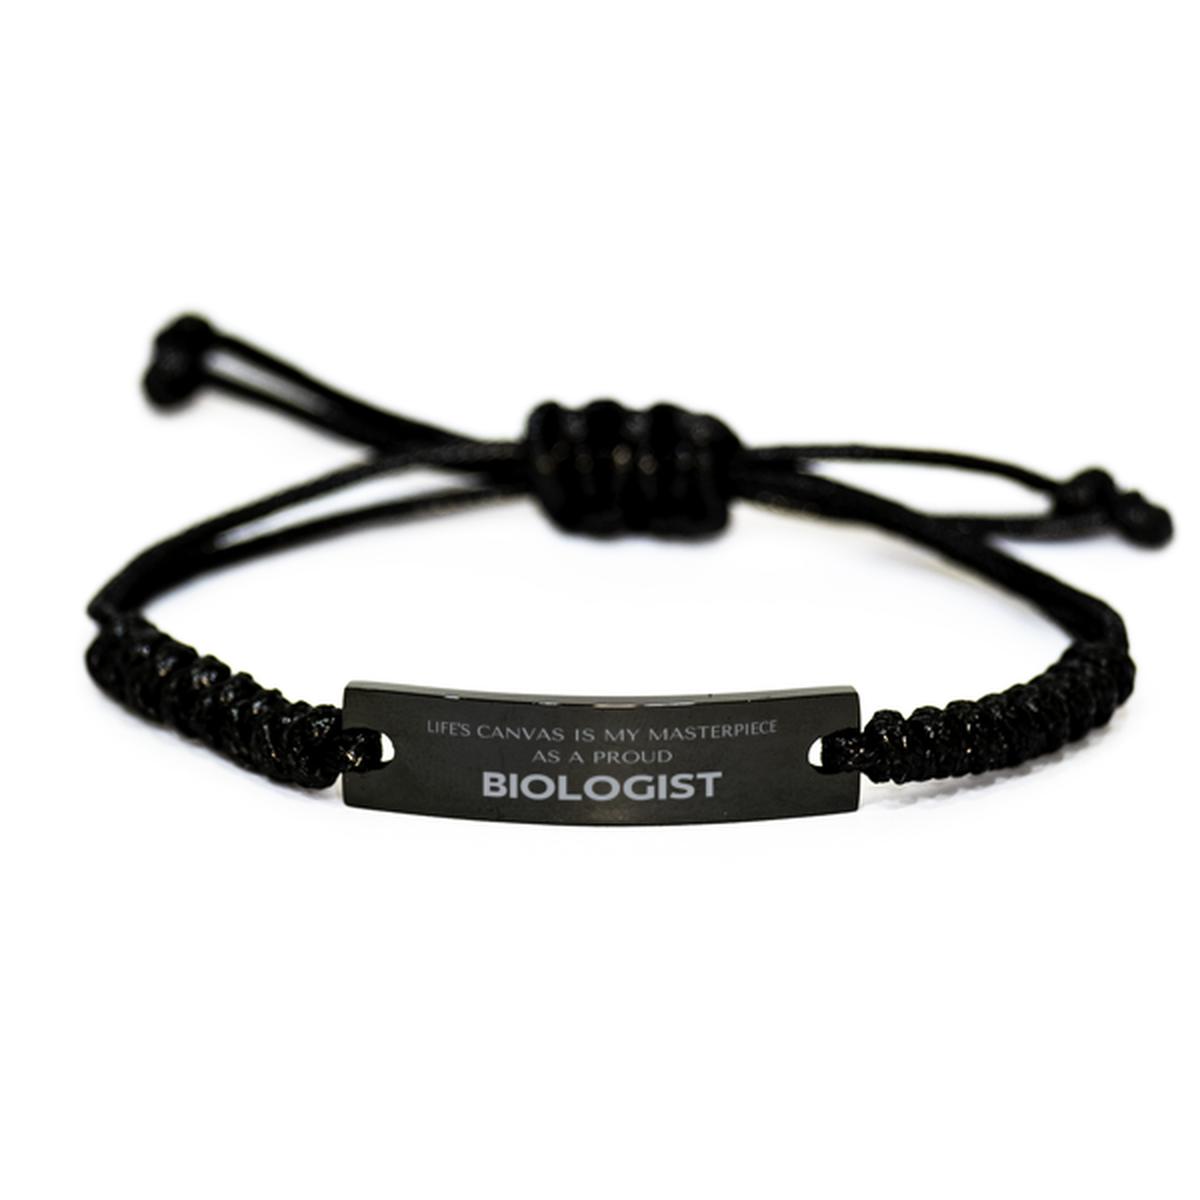 Proud Biologist Gifts, Life's canvas is my masterpiece, Epic Birthday Christmas Unique Black Rope Bracelet For Biologist, Coworkers, Men, Women, Friends